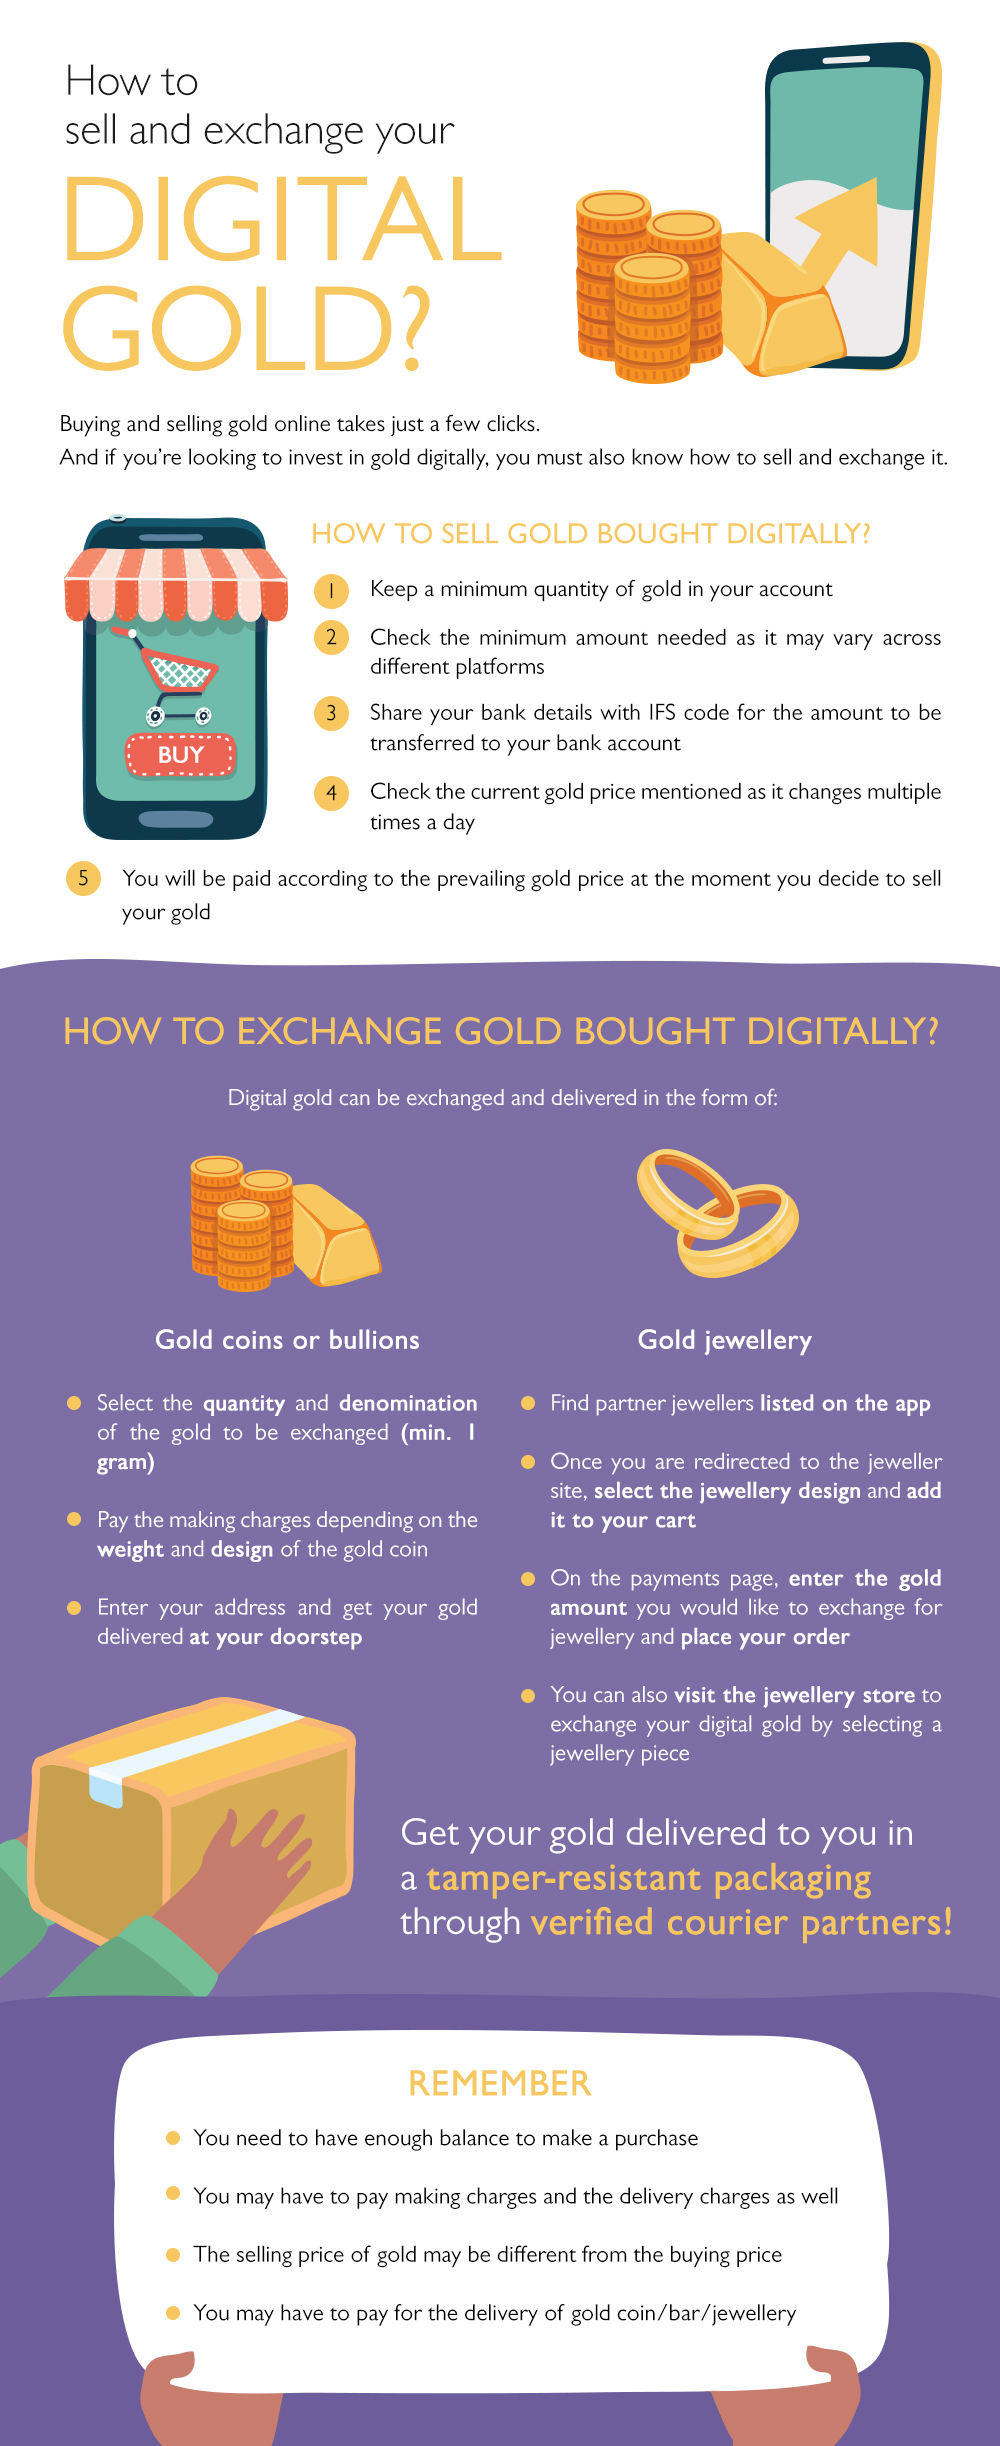 Digital Gold: How to sell or Redeem it